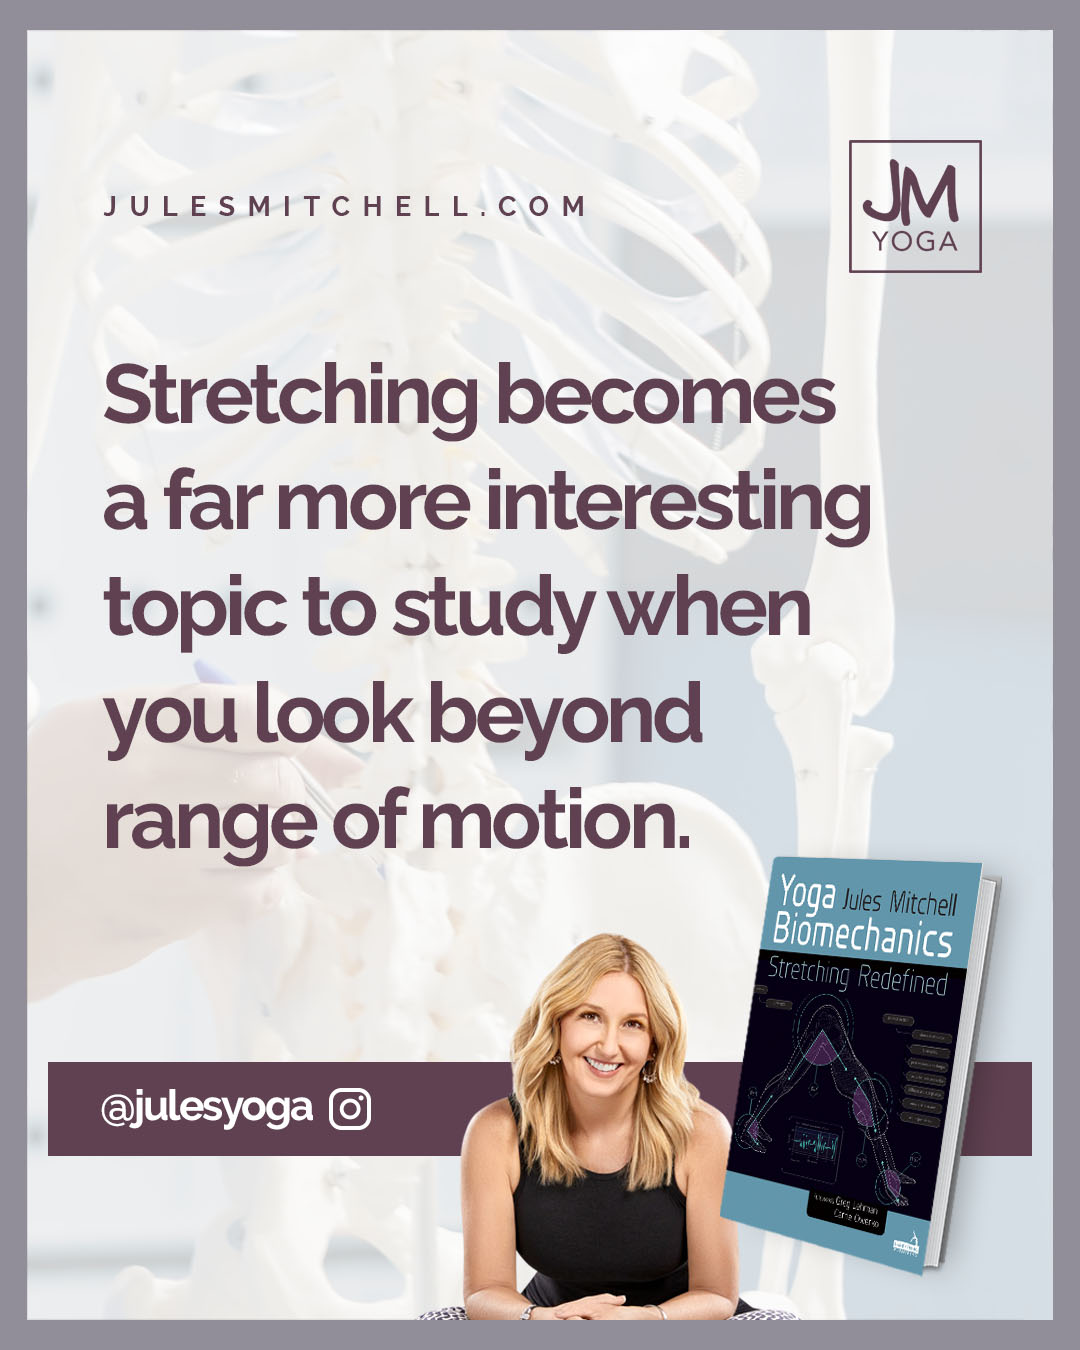 Stretching becomes a far more interesting topic to study when you look beyond range of motion.